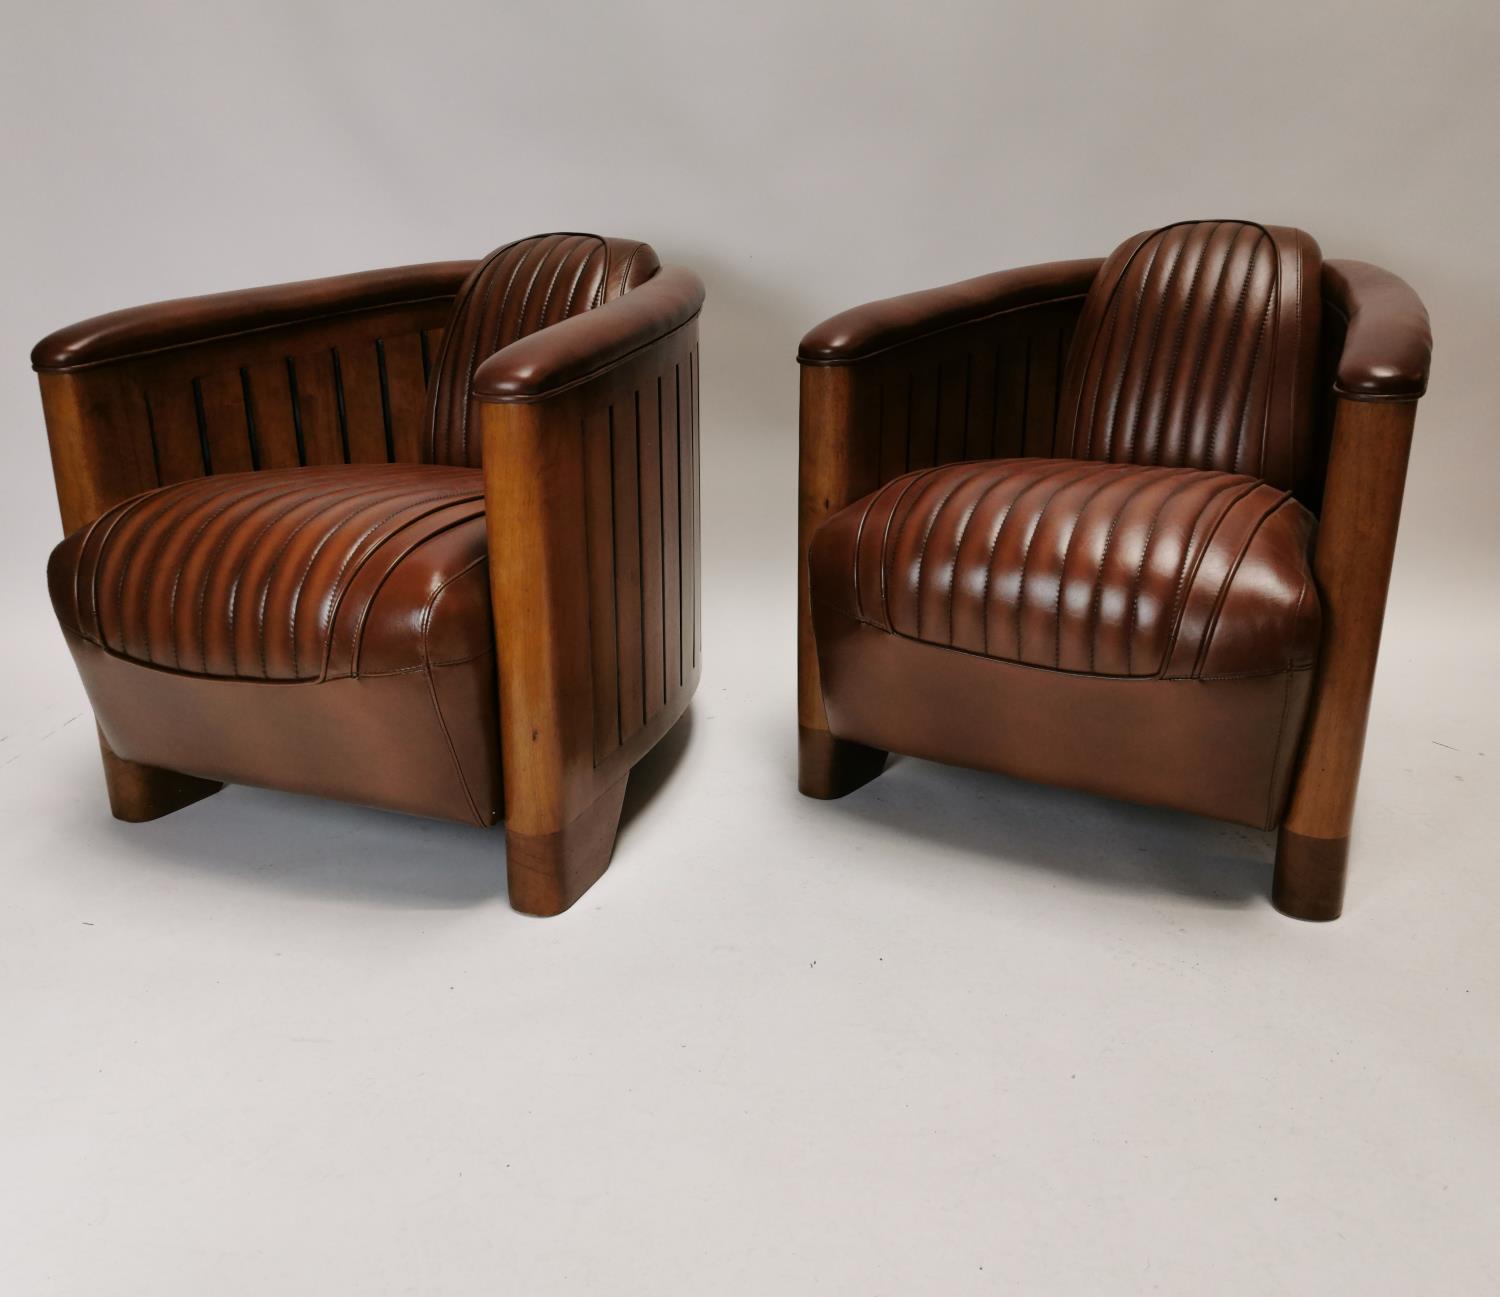 Pair of exceptional quality Art Deco style leather upholstered and wood Aviator club chairs {72 cm H